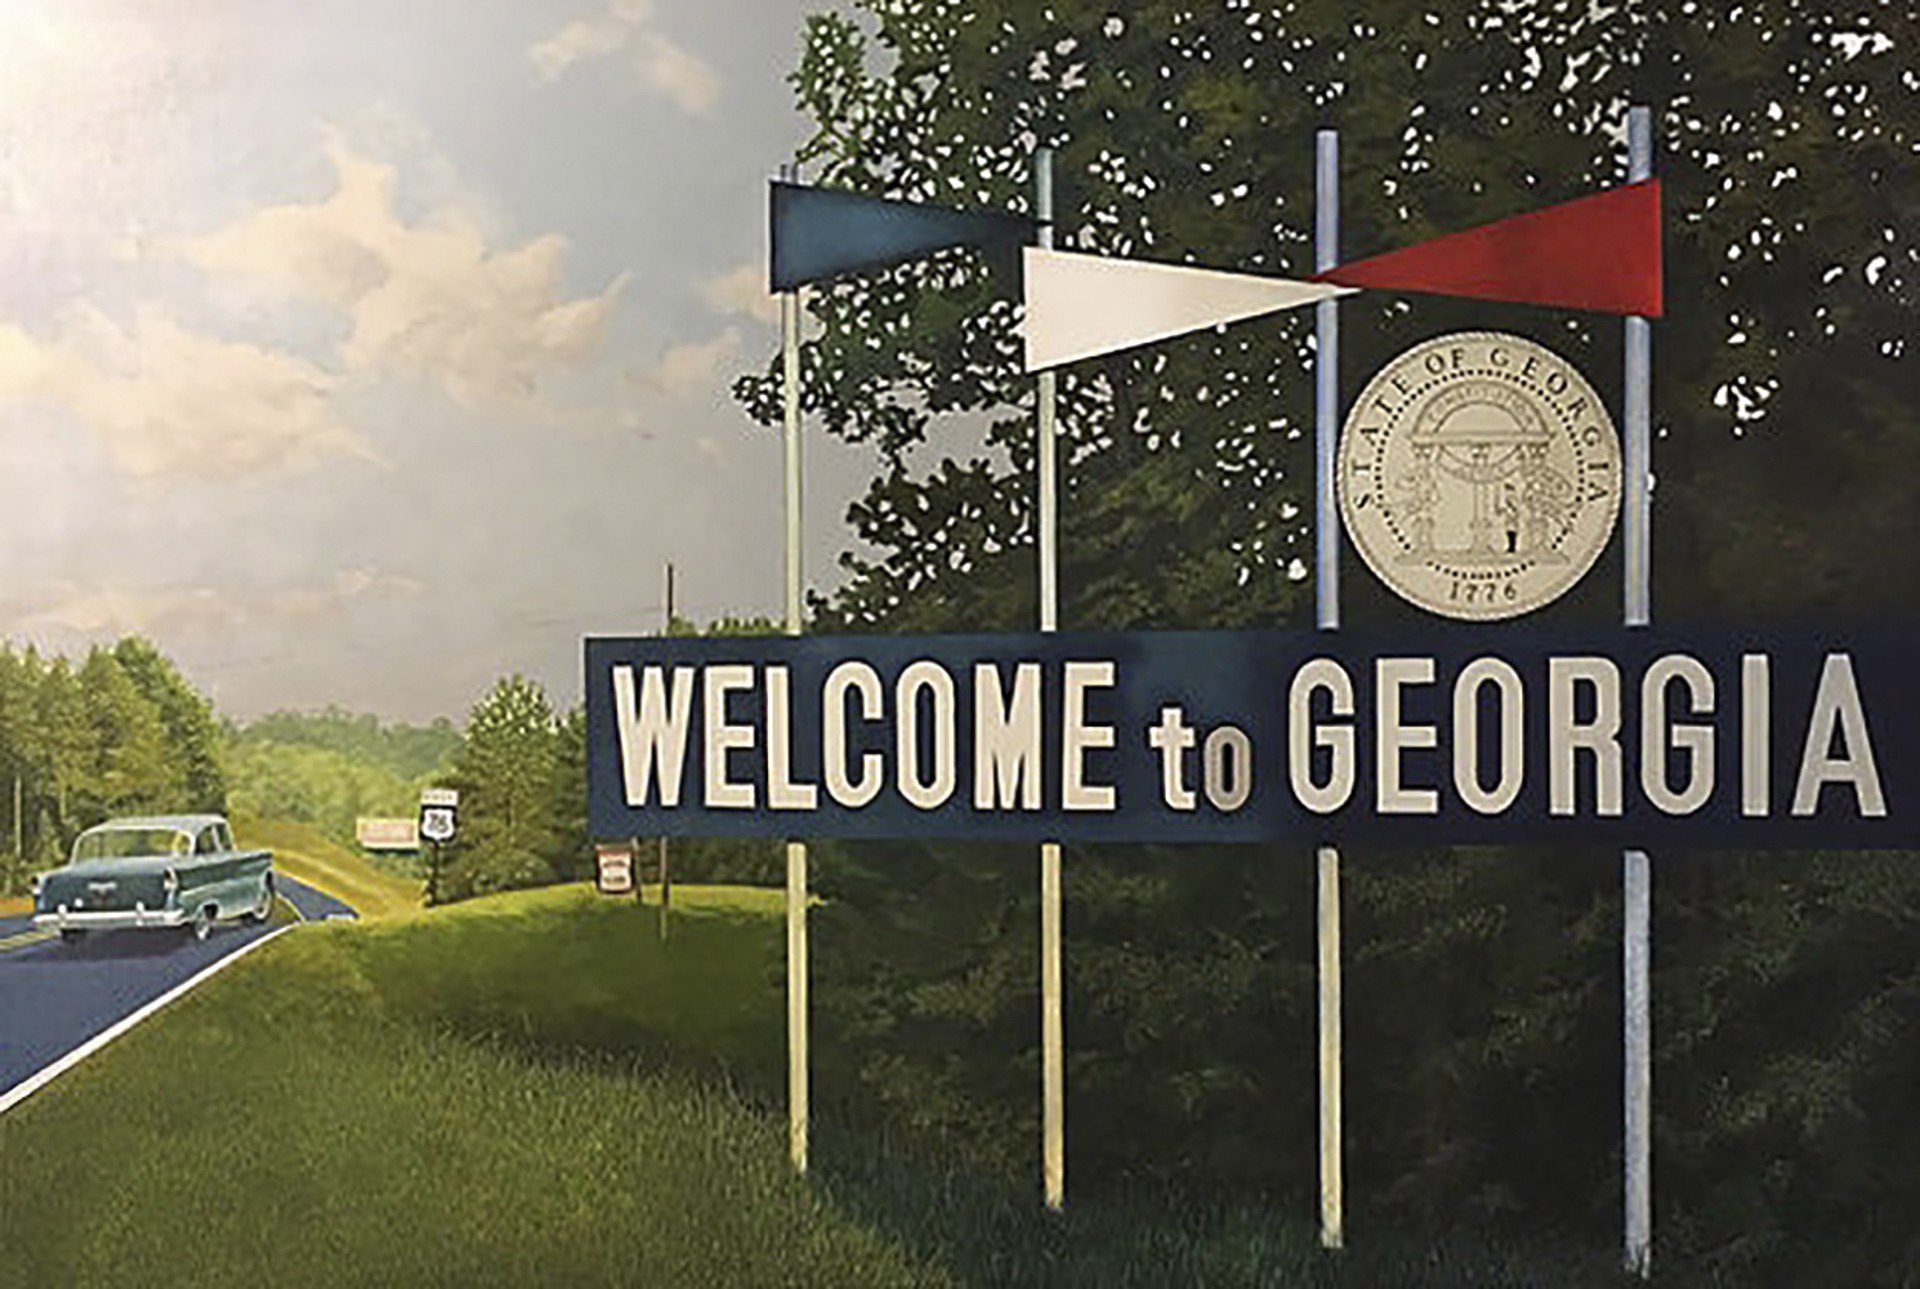 Welcome to Georgia by Christopher Stevens